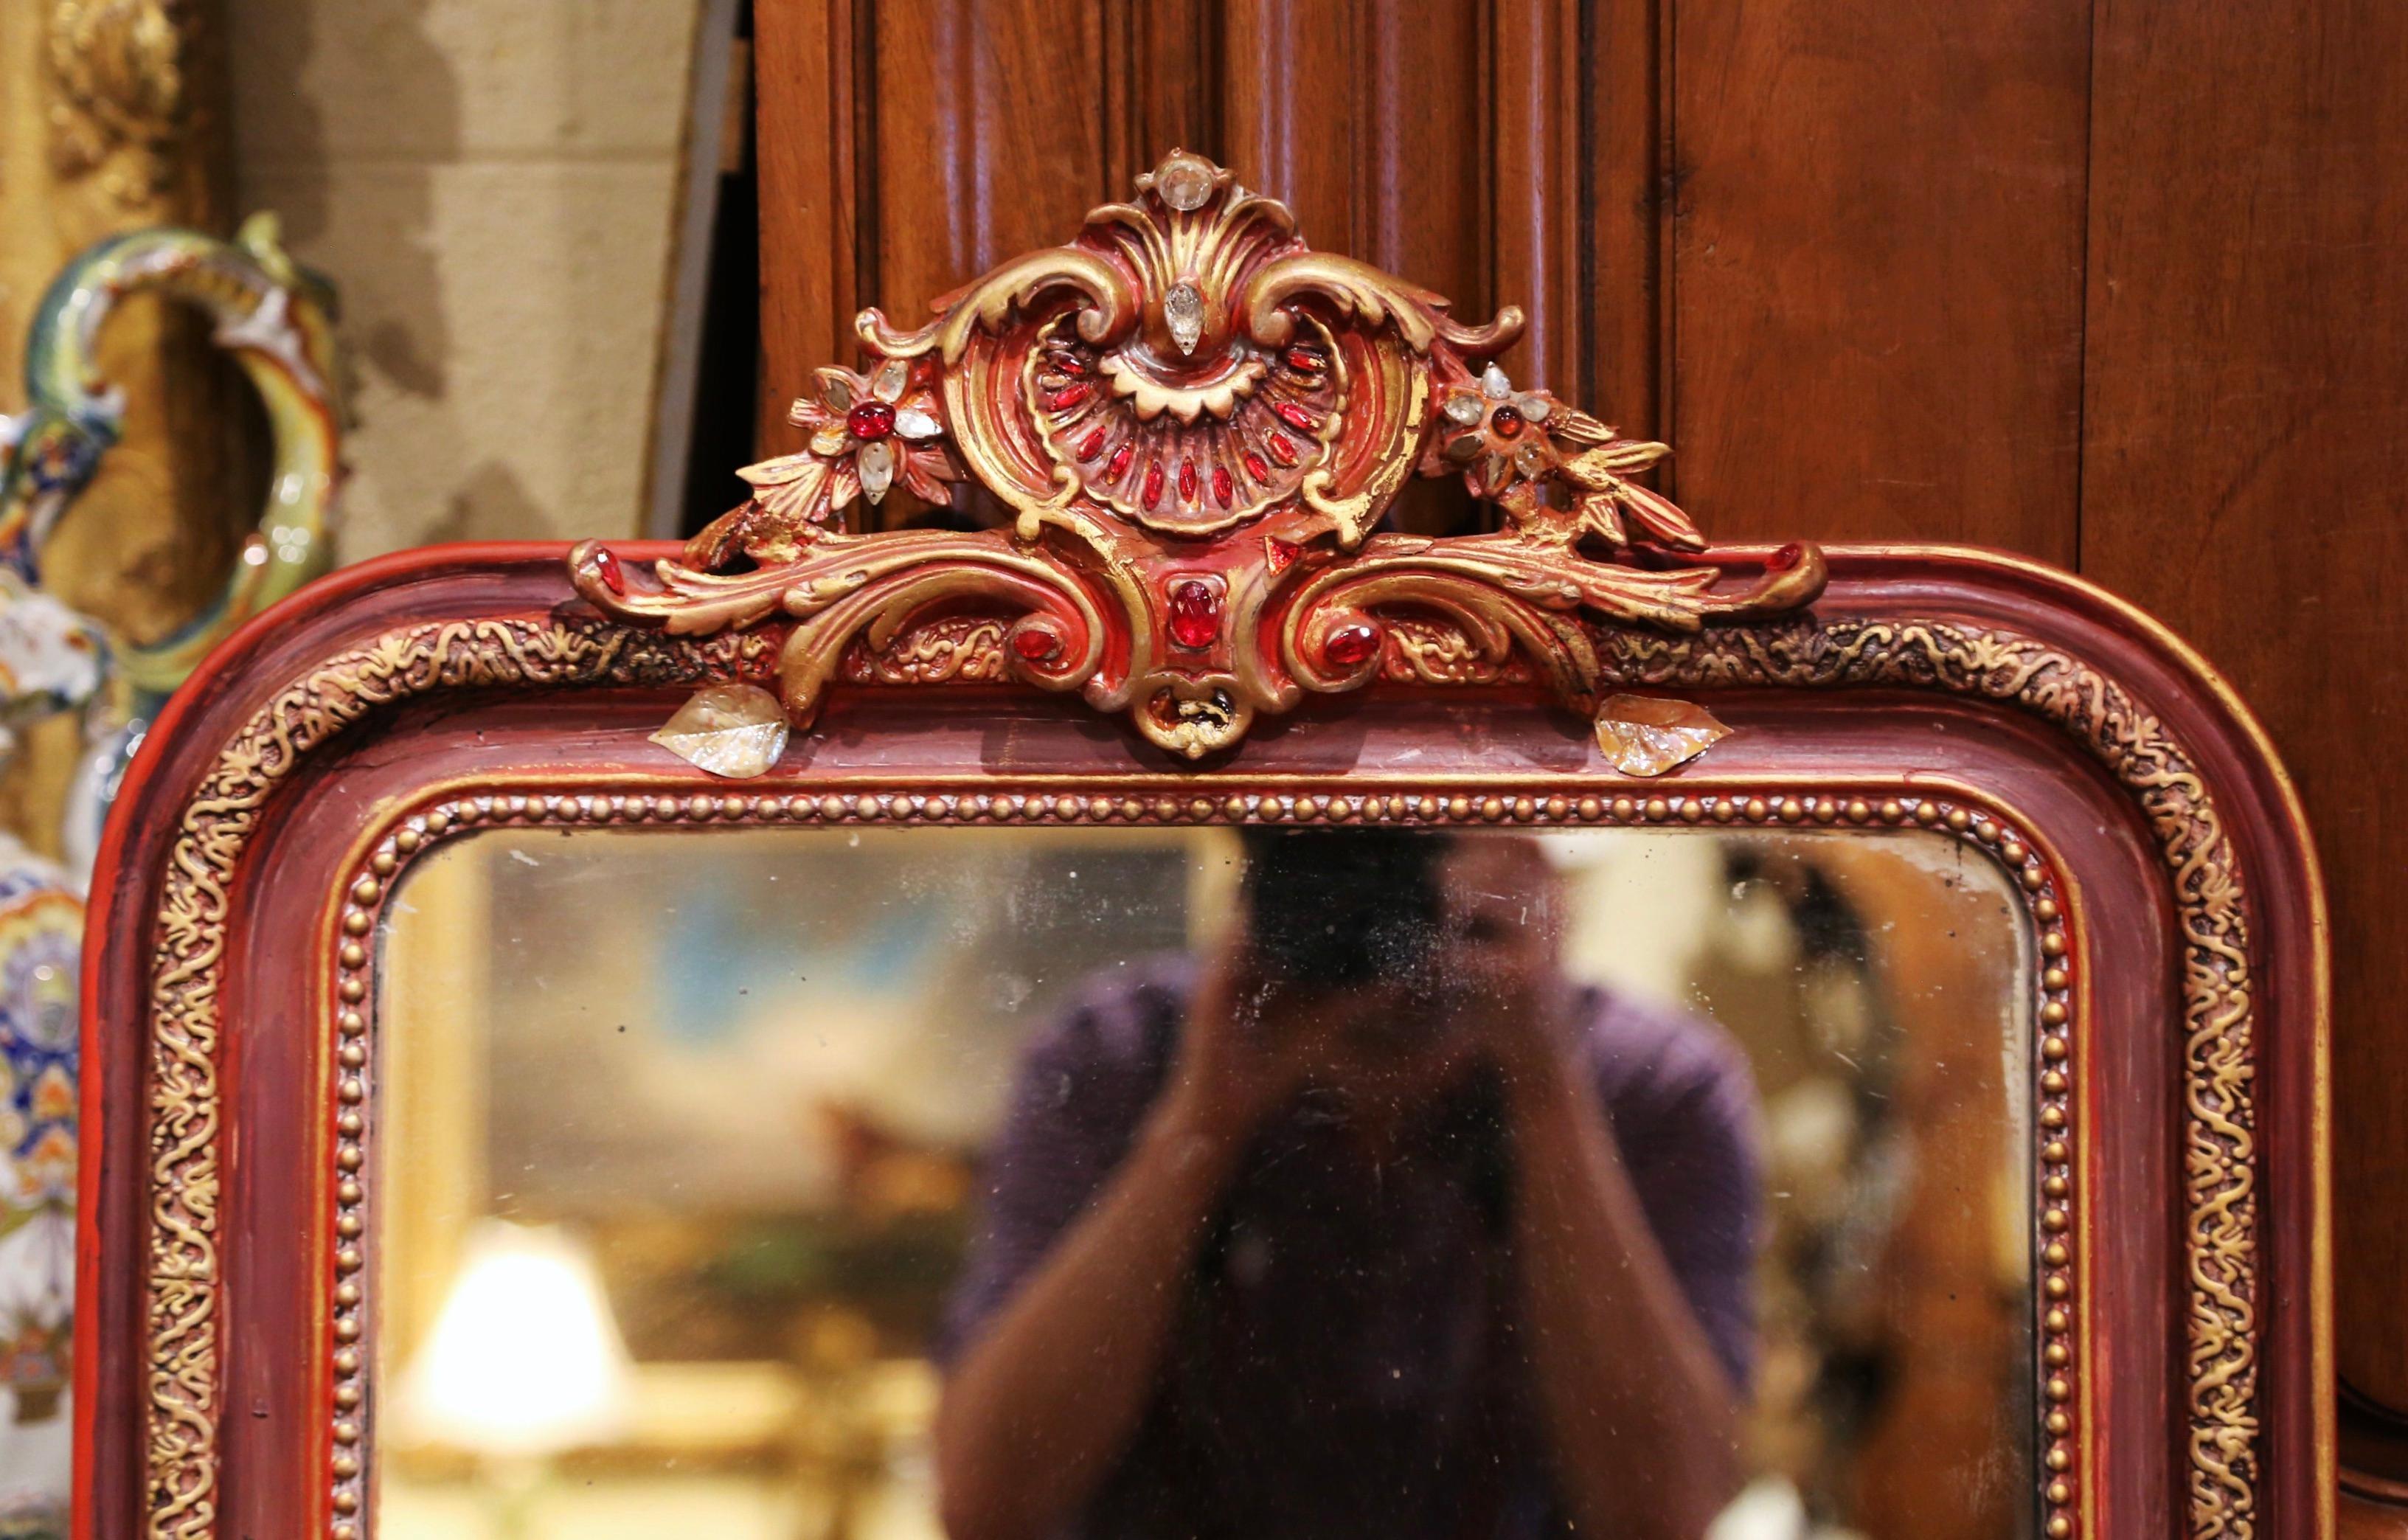 This elegant, antique wall mirror was crafted in France, circa 1880. The mirror is decorated at the pediment with a large cartouche shell in the center flanked with carved floral and leaf motifs and embellished with faux jewel accents. The two-tone